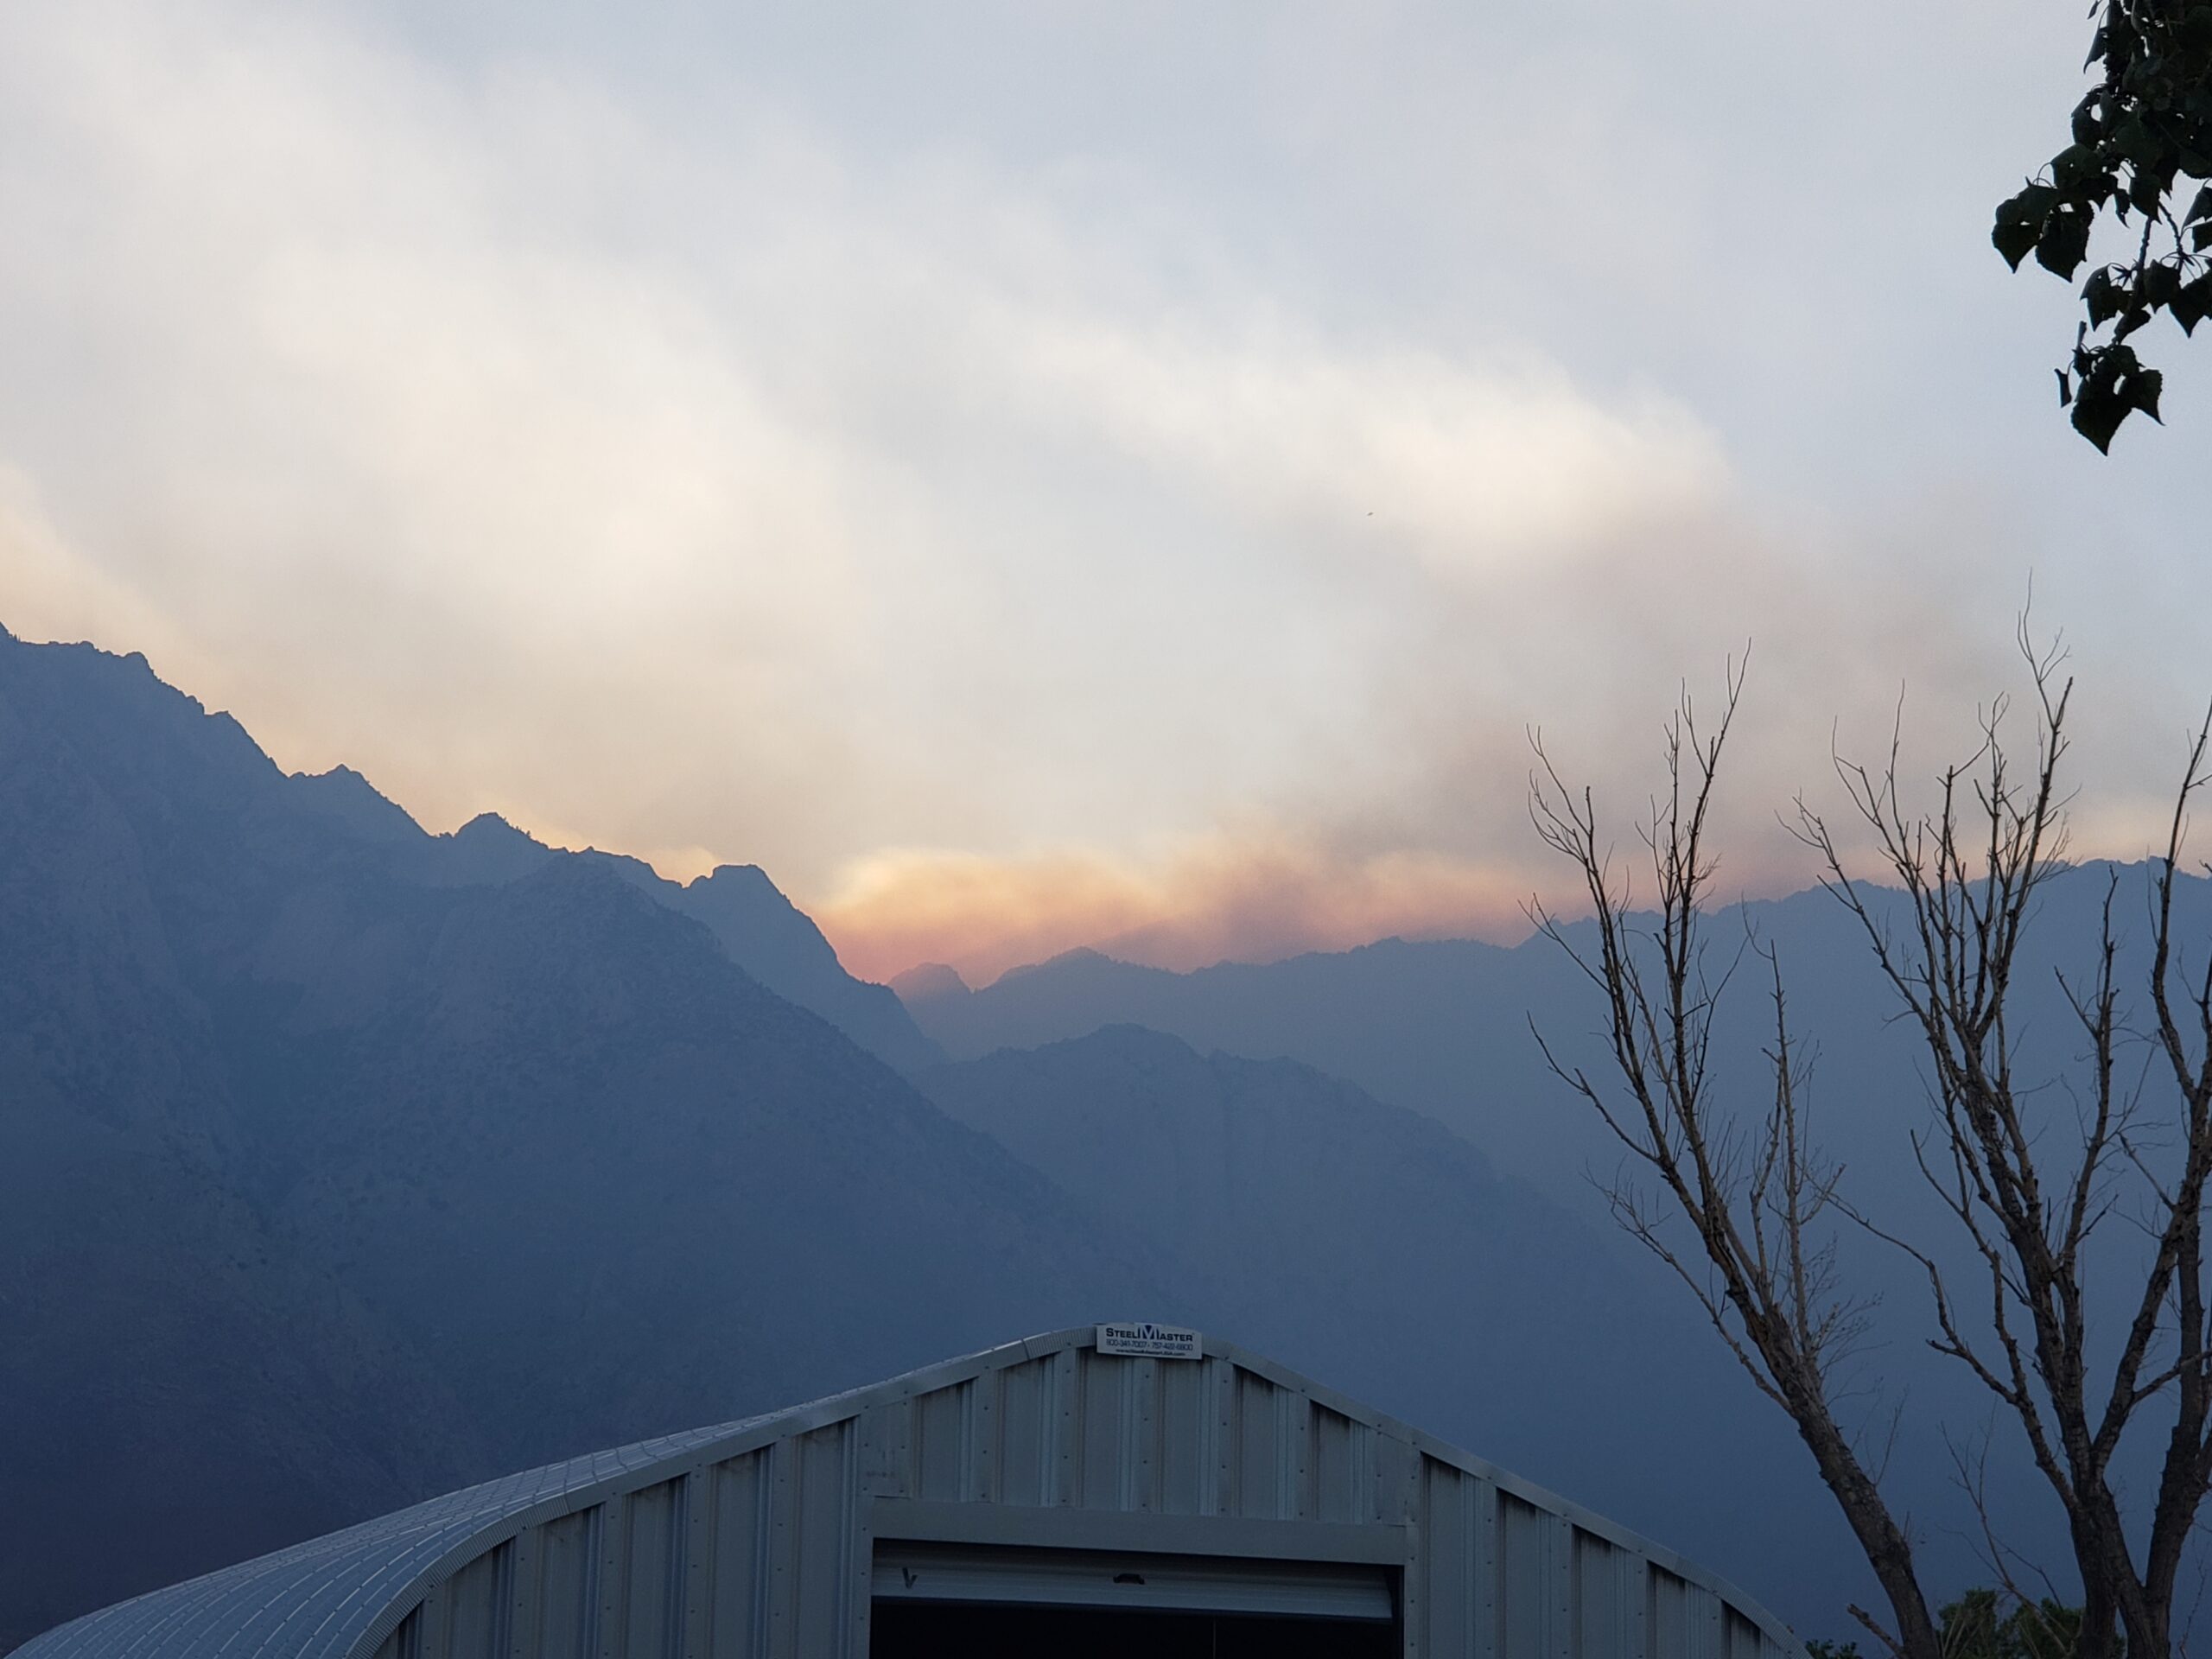 cut off photo of quonset hut with sunset and mountains in background